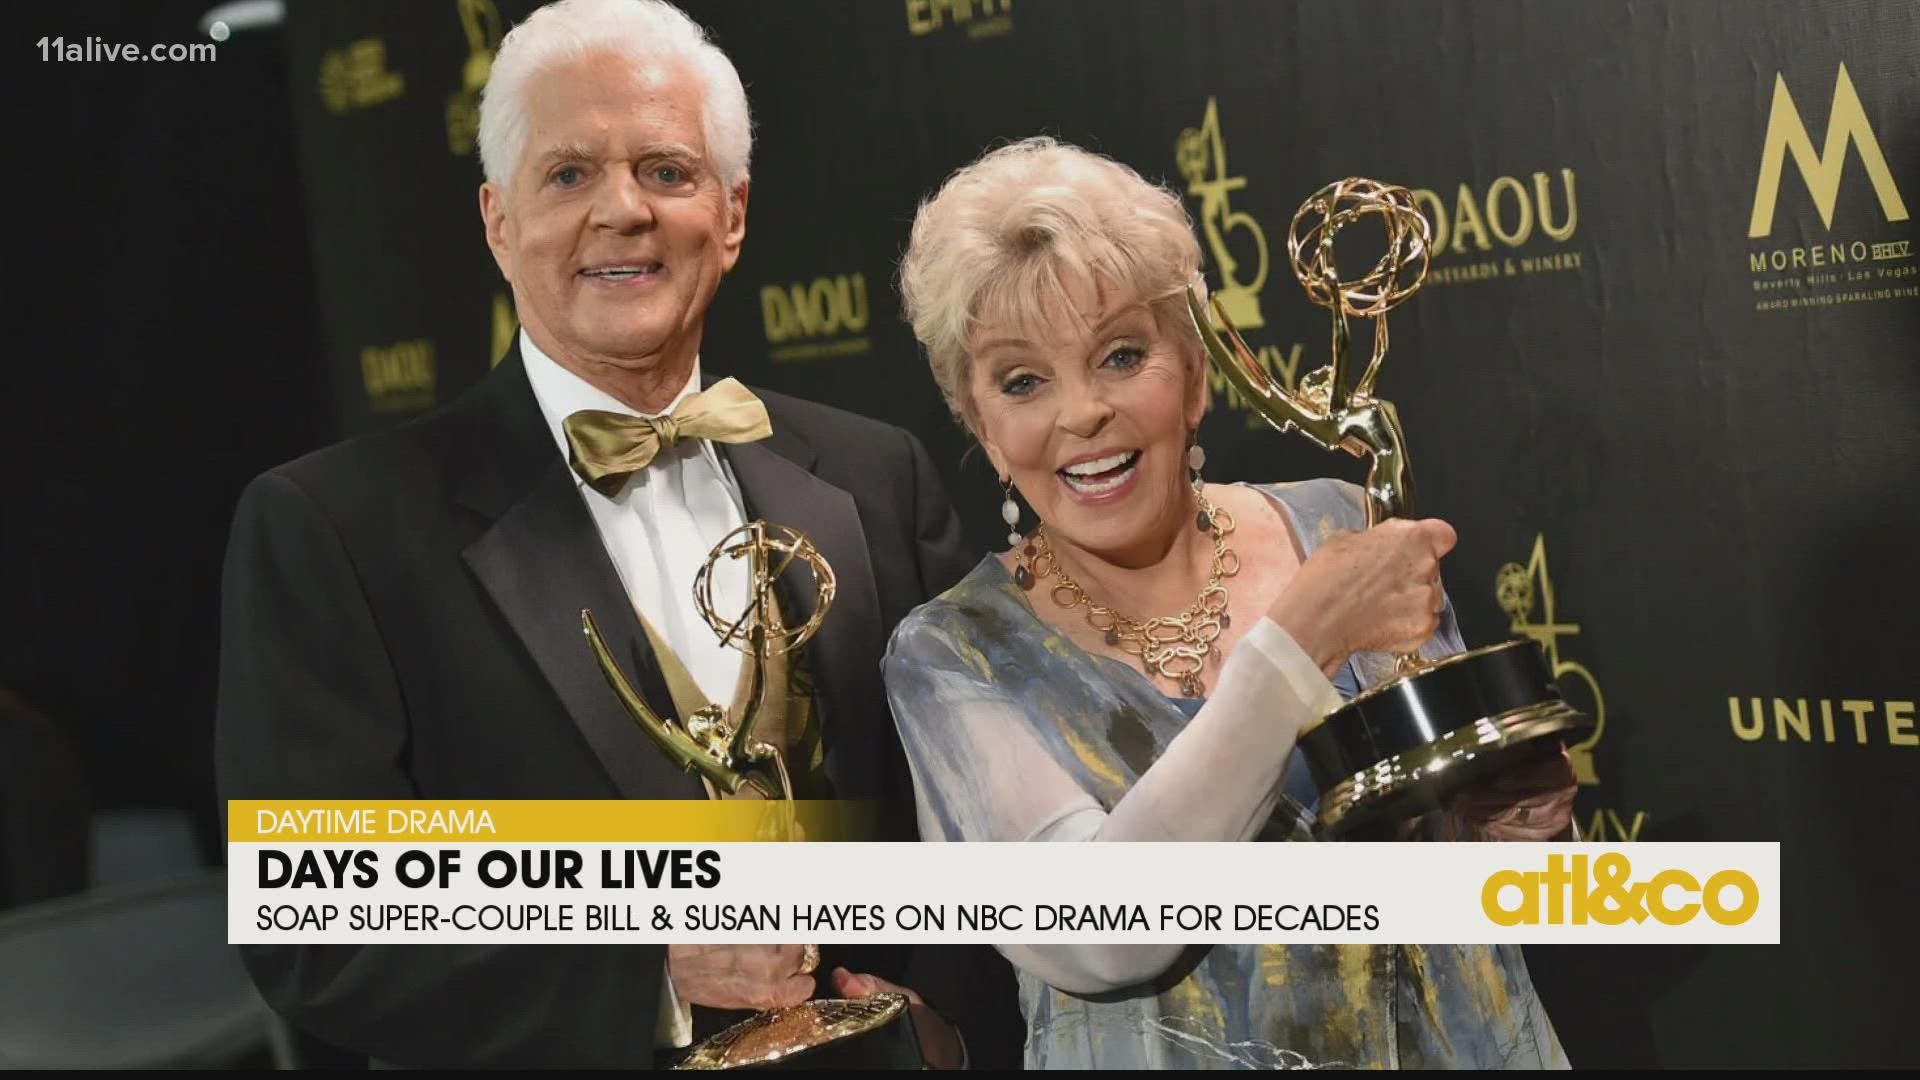 Bill Hayes and Susan Seaforth Hayes have been delighting daytime audiences for decades as Doug and Julie on NBC's 'Days of Our Lives.'